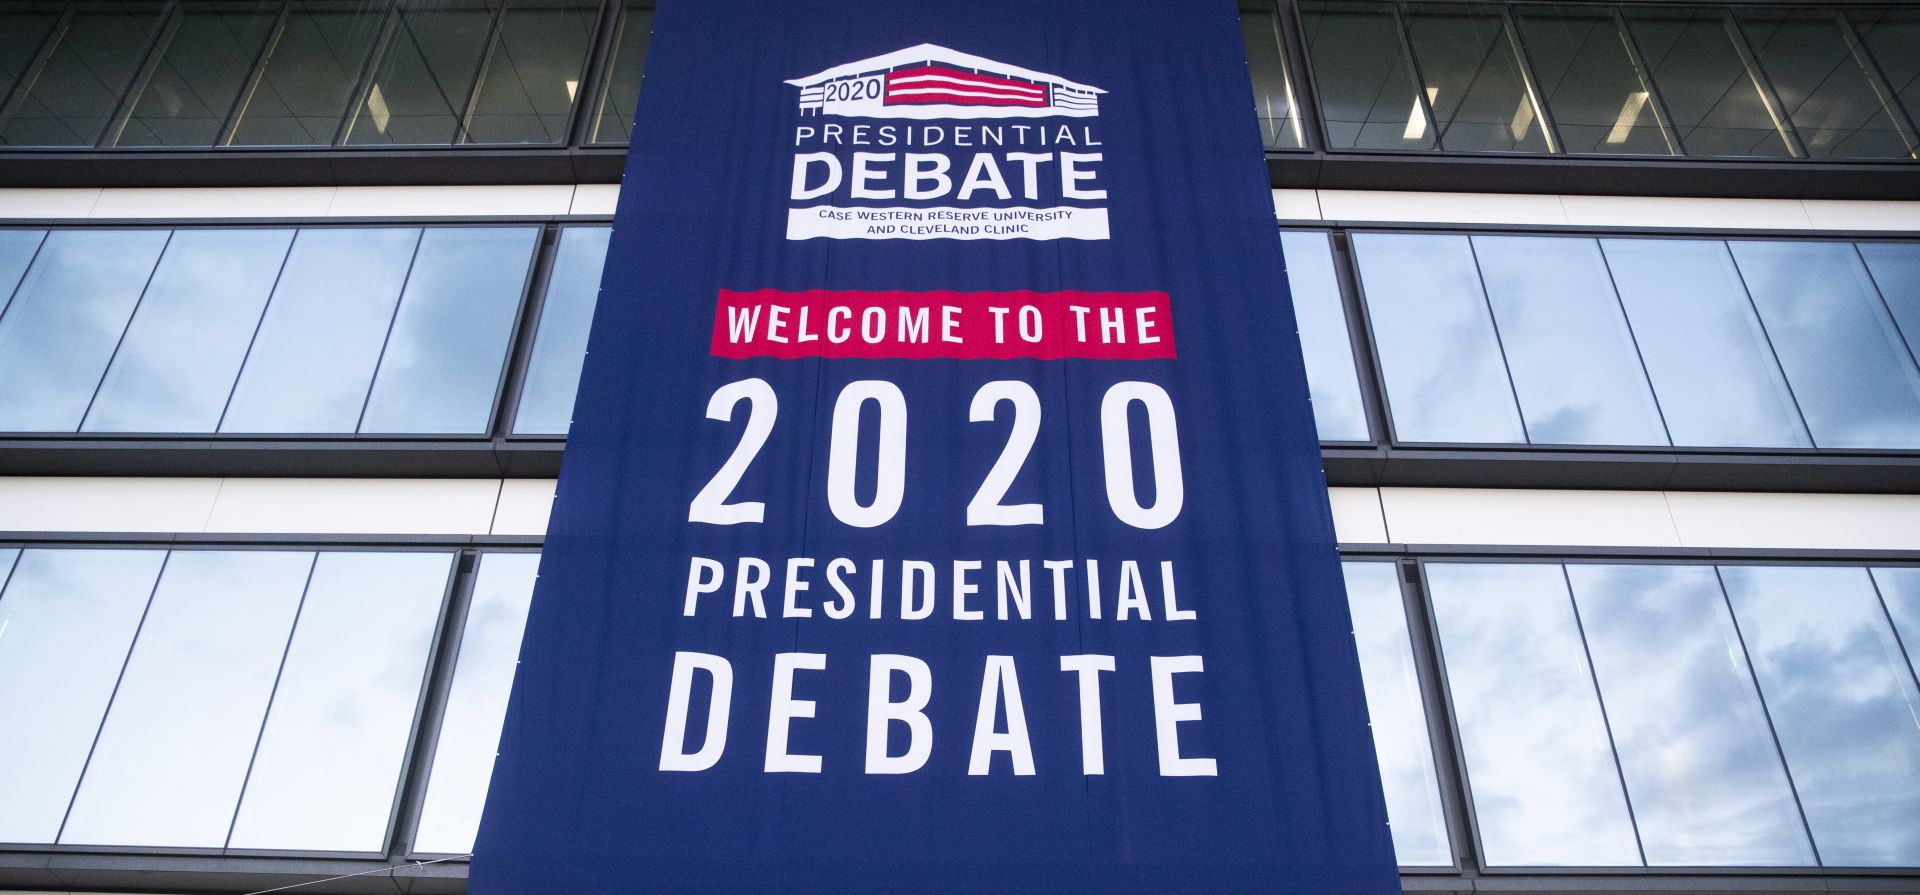 epa08703761 Signage hangs at the site of the first 2020 presidential election debate, at Samson Pavilion on the main campus of the Cleveland Clinic in Cleveland, Ohio, USA, 28 September 2020. The first presidential debate between US President Donald J. Trump and Democratic presidential candidate Joe Biden takes place 29 September and is co-hosted by Case Western Reserve University and the Cleveland Clinic.  EPA/MICHAEL REYNOLDS